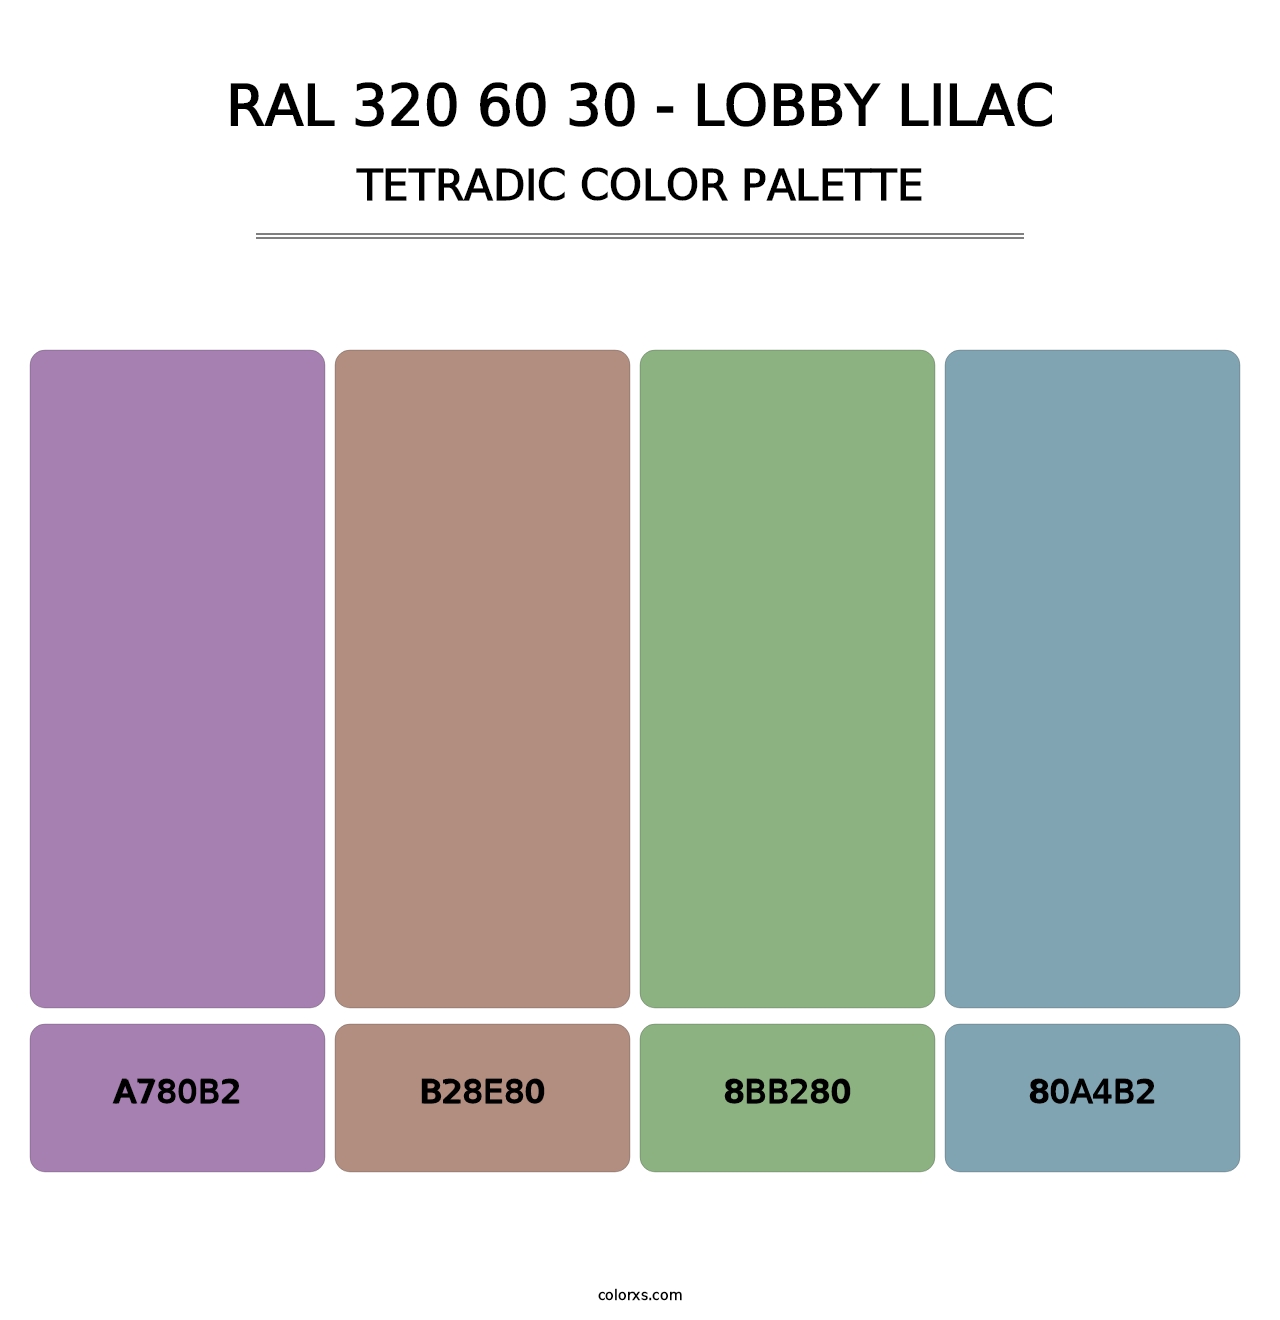 RAL 320 60 30 - Lobby Lilac - Tetradic Color Palette